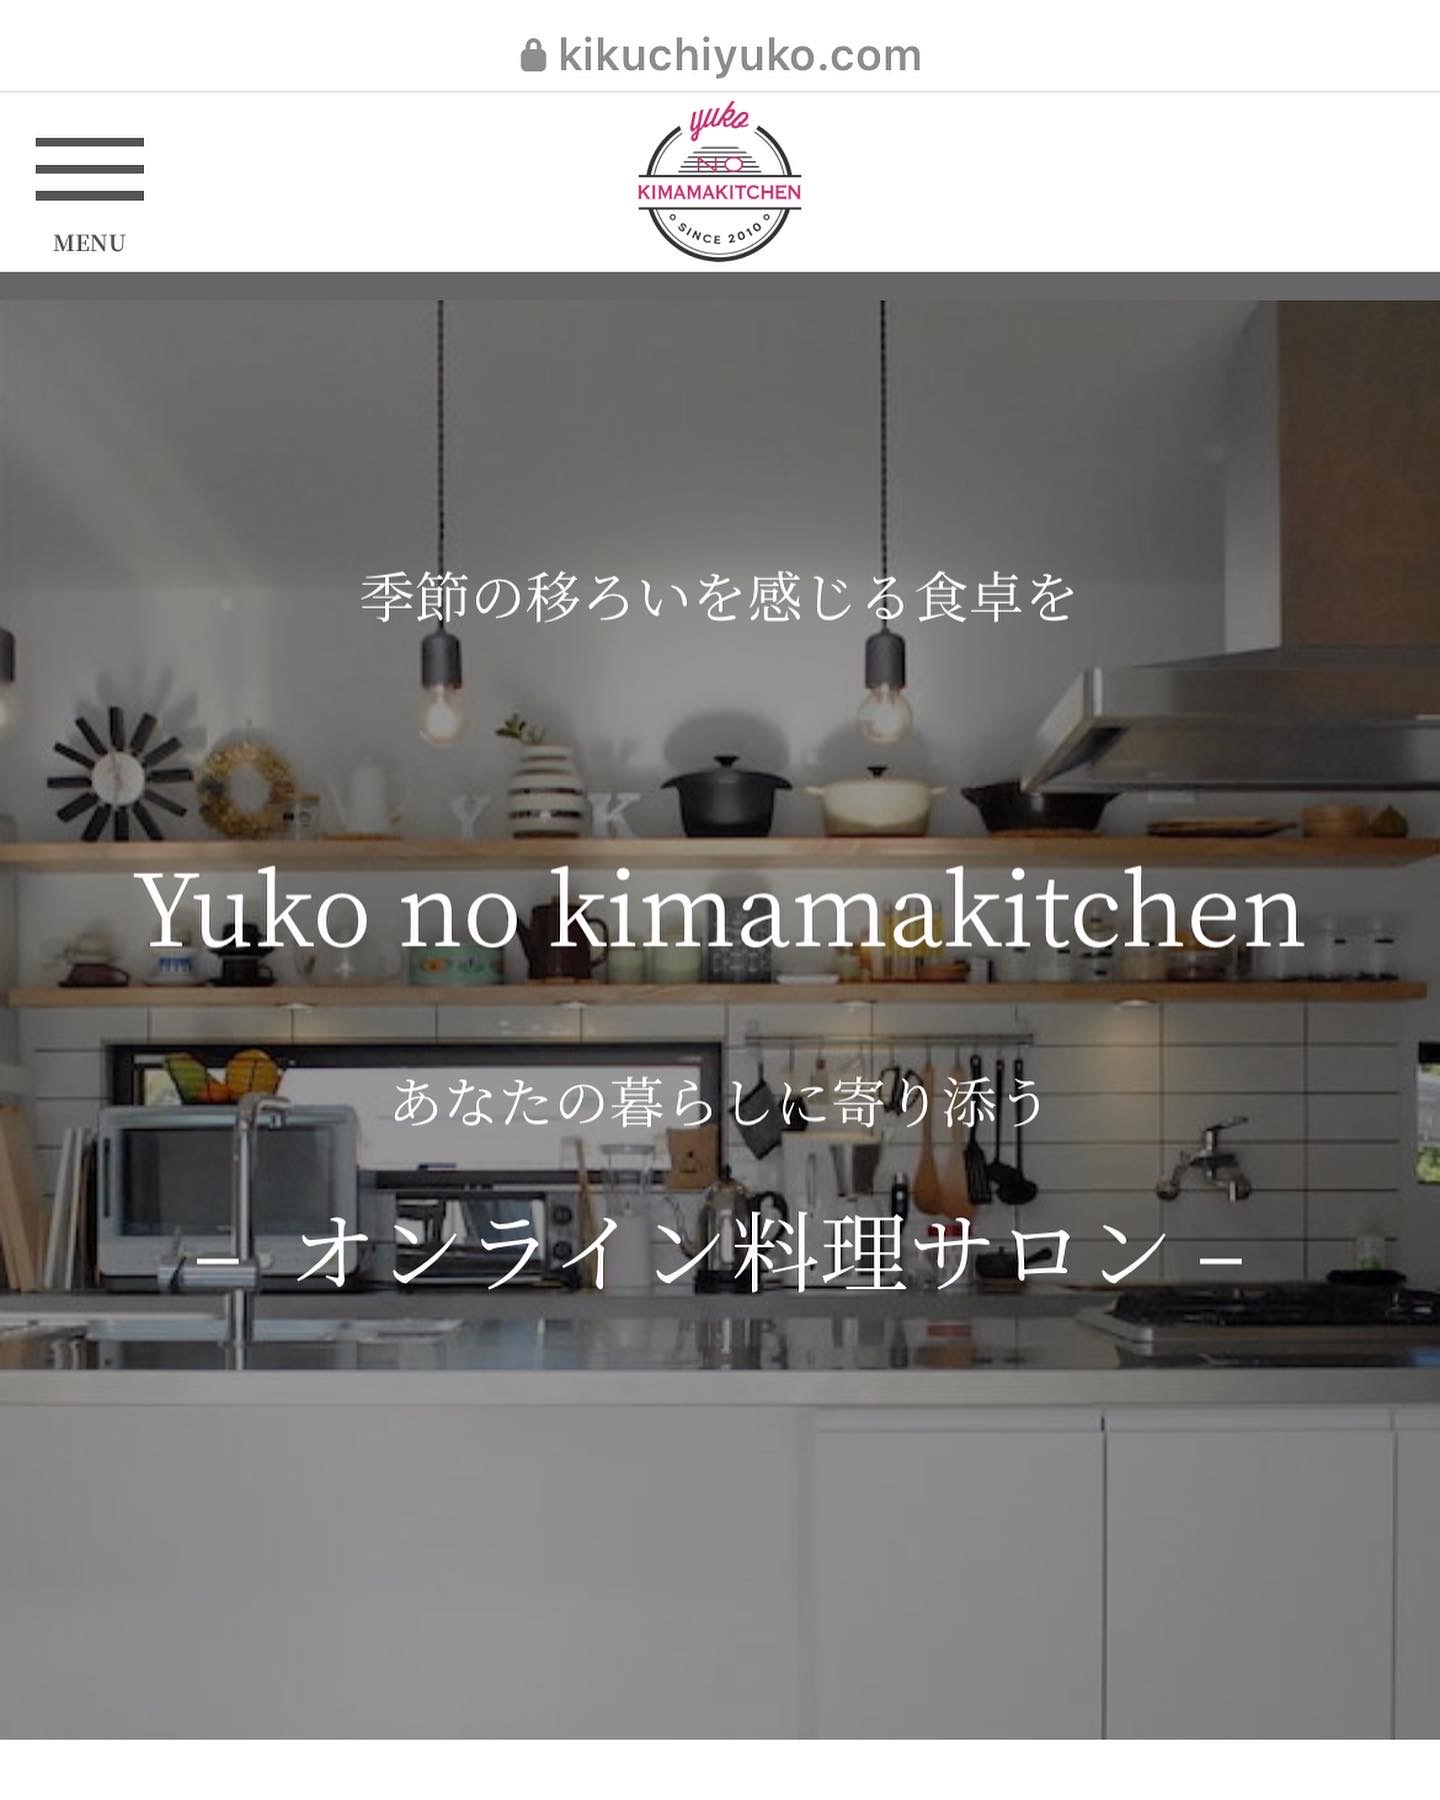 Instagram　月額制オンライン料理サロン　新規会員募集スタート！